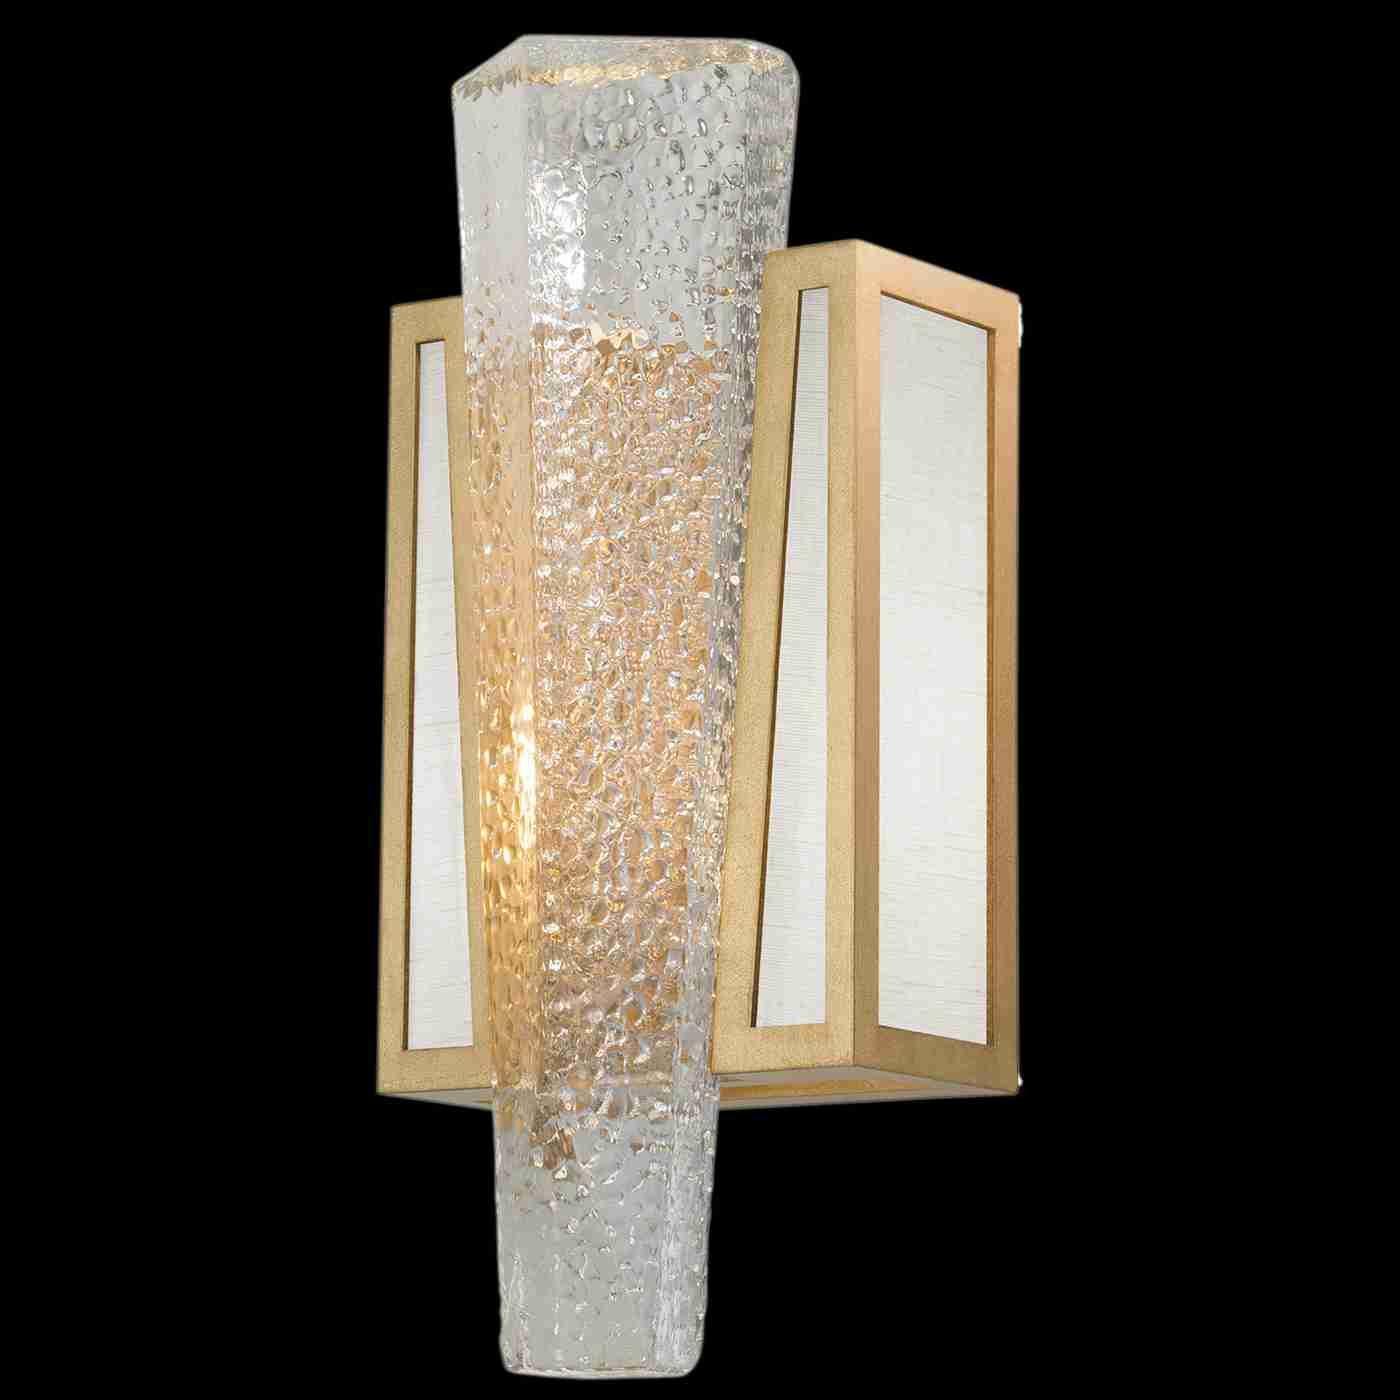 Fine Art Handcrafted Lighting - Crownstone Sconce - Lights Canada